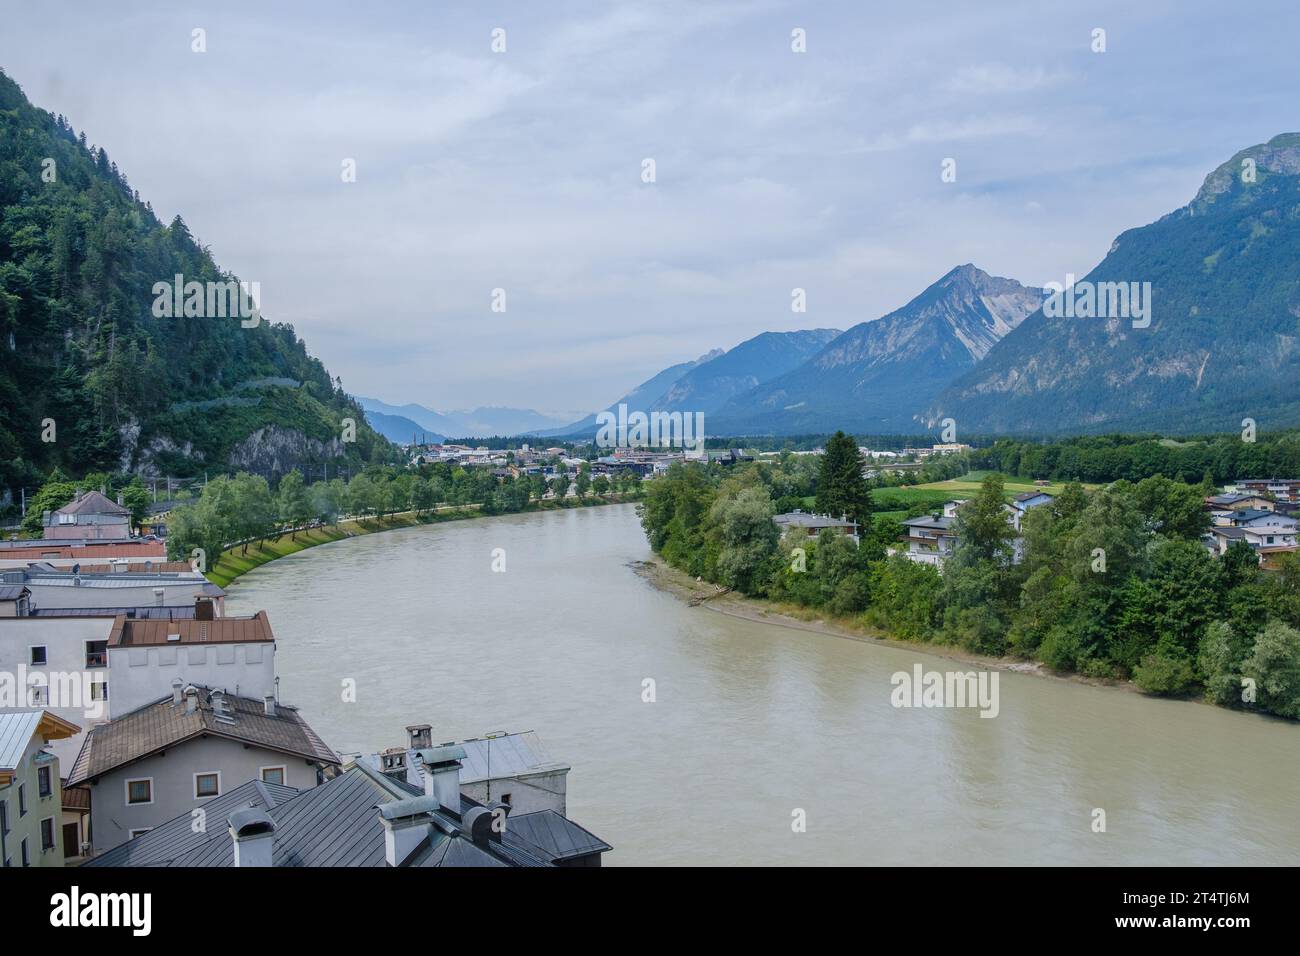 Elevated view from church tower viewing platform inside Augustinermuseum of the Inn River & towns of Rattenberg & Kramsach with mountains. Austria. Stock Photo